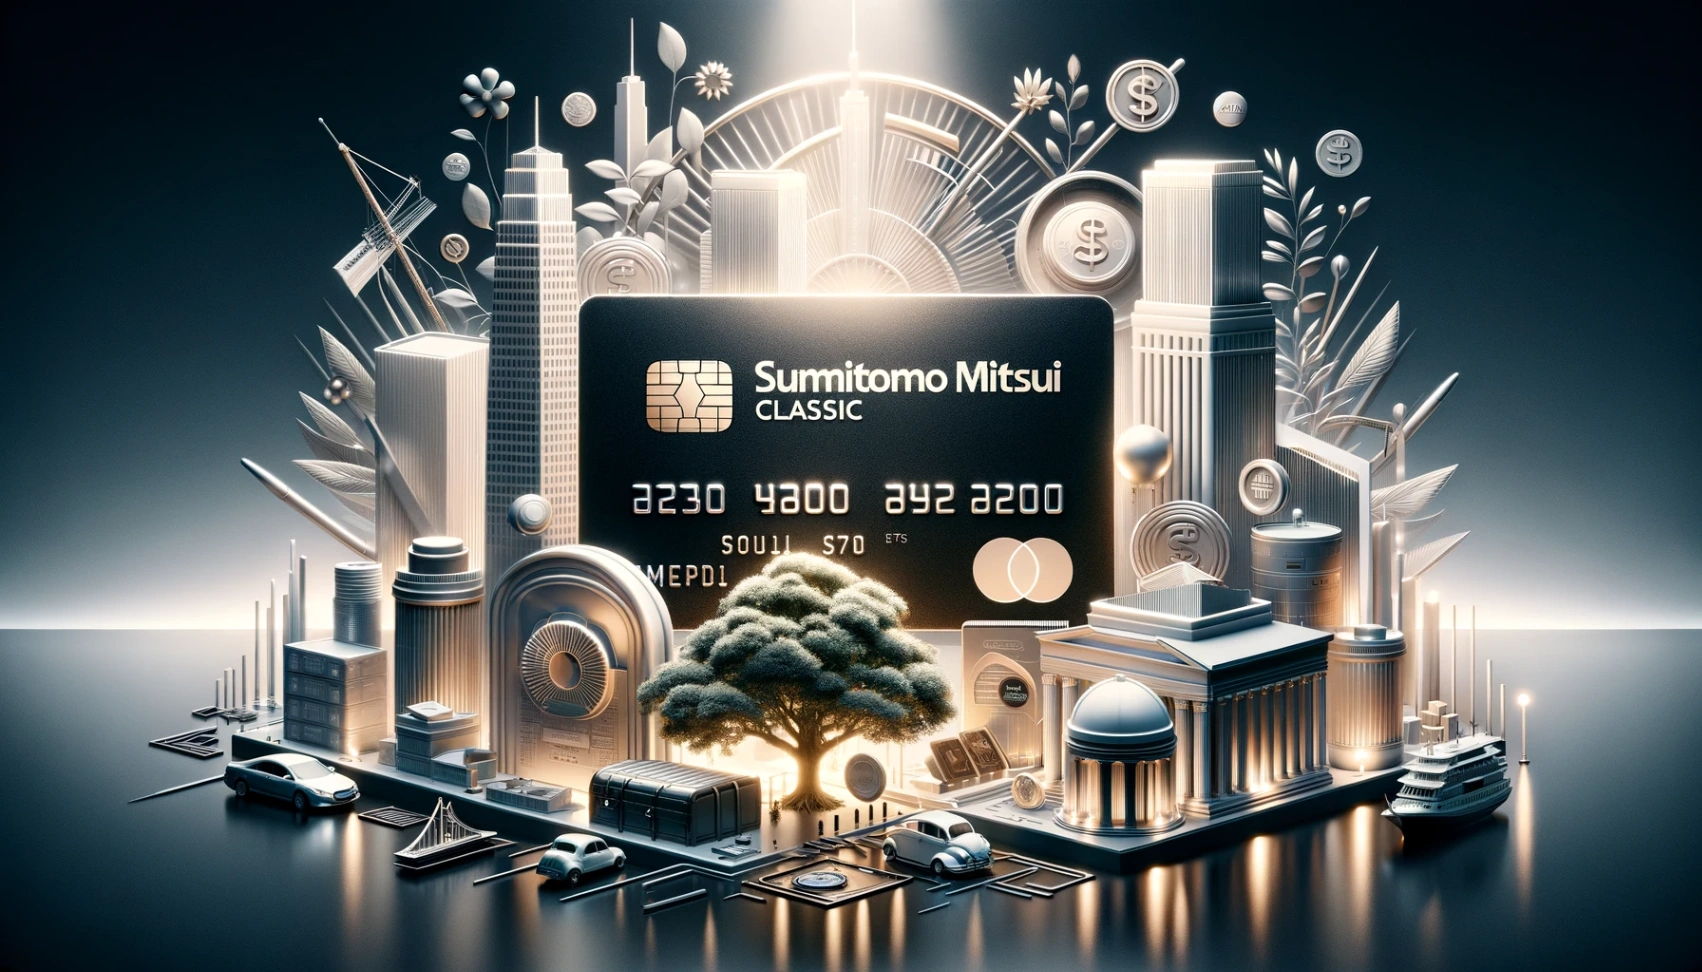 Sumitomo Mitsui Classic Card – Benefits and How to Apply